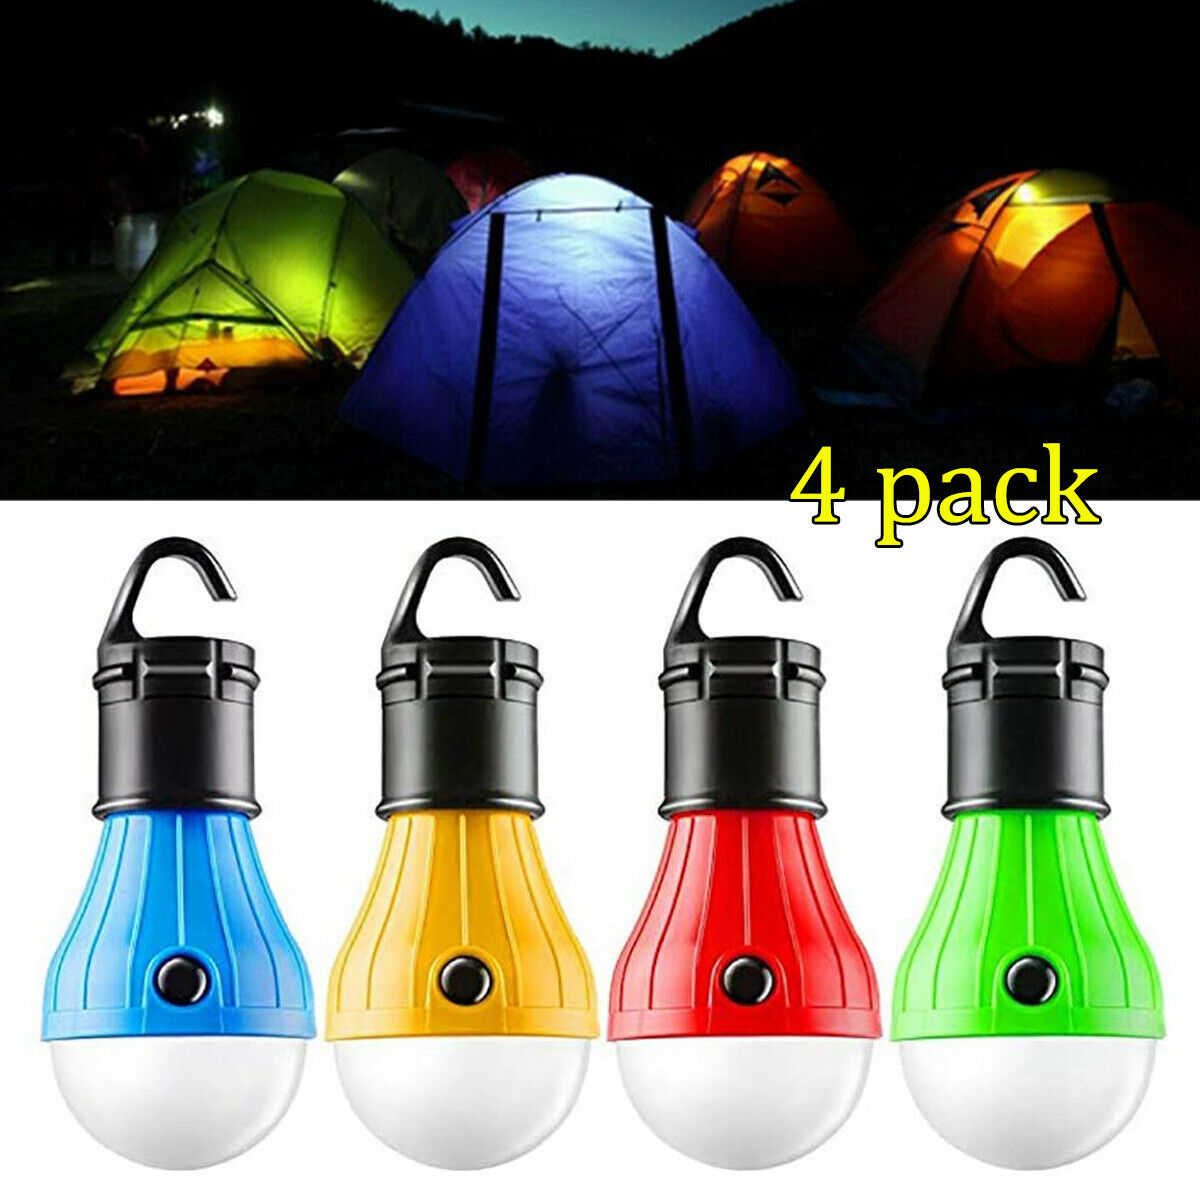 4pack Led Portable Camping Tent Lamp Emergency Hiking Outdoor Light Lantern Bulb